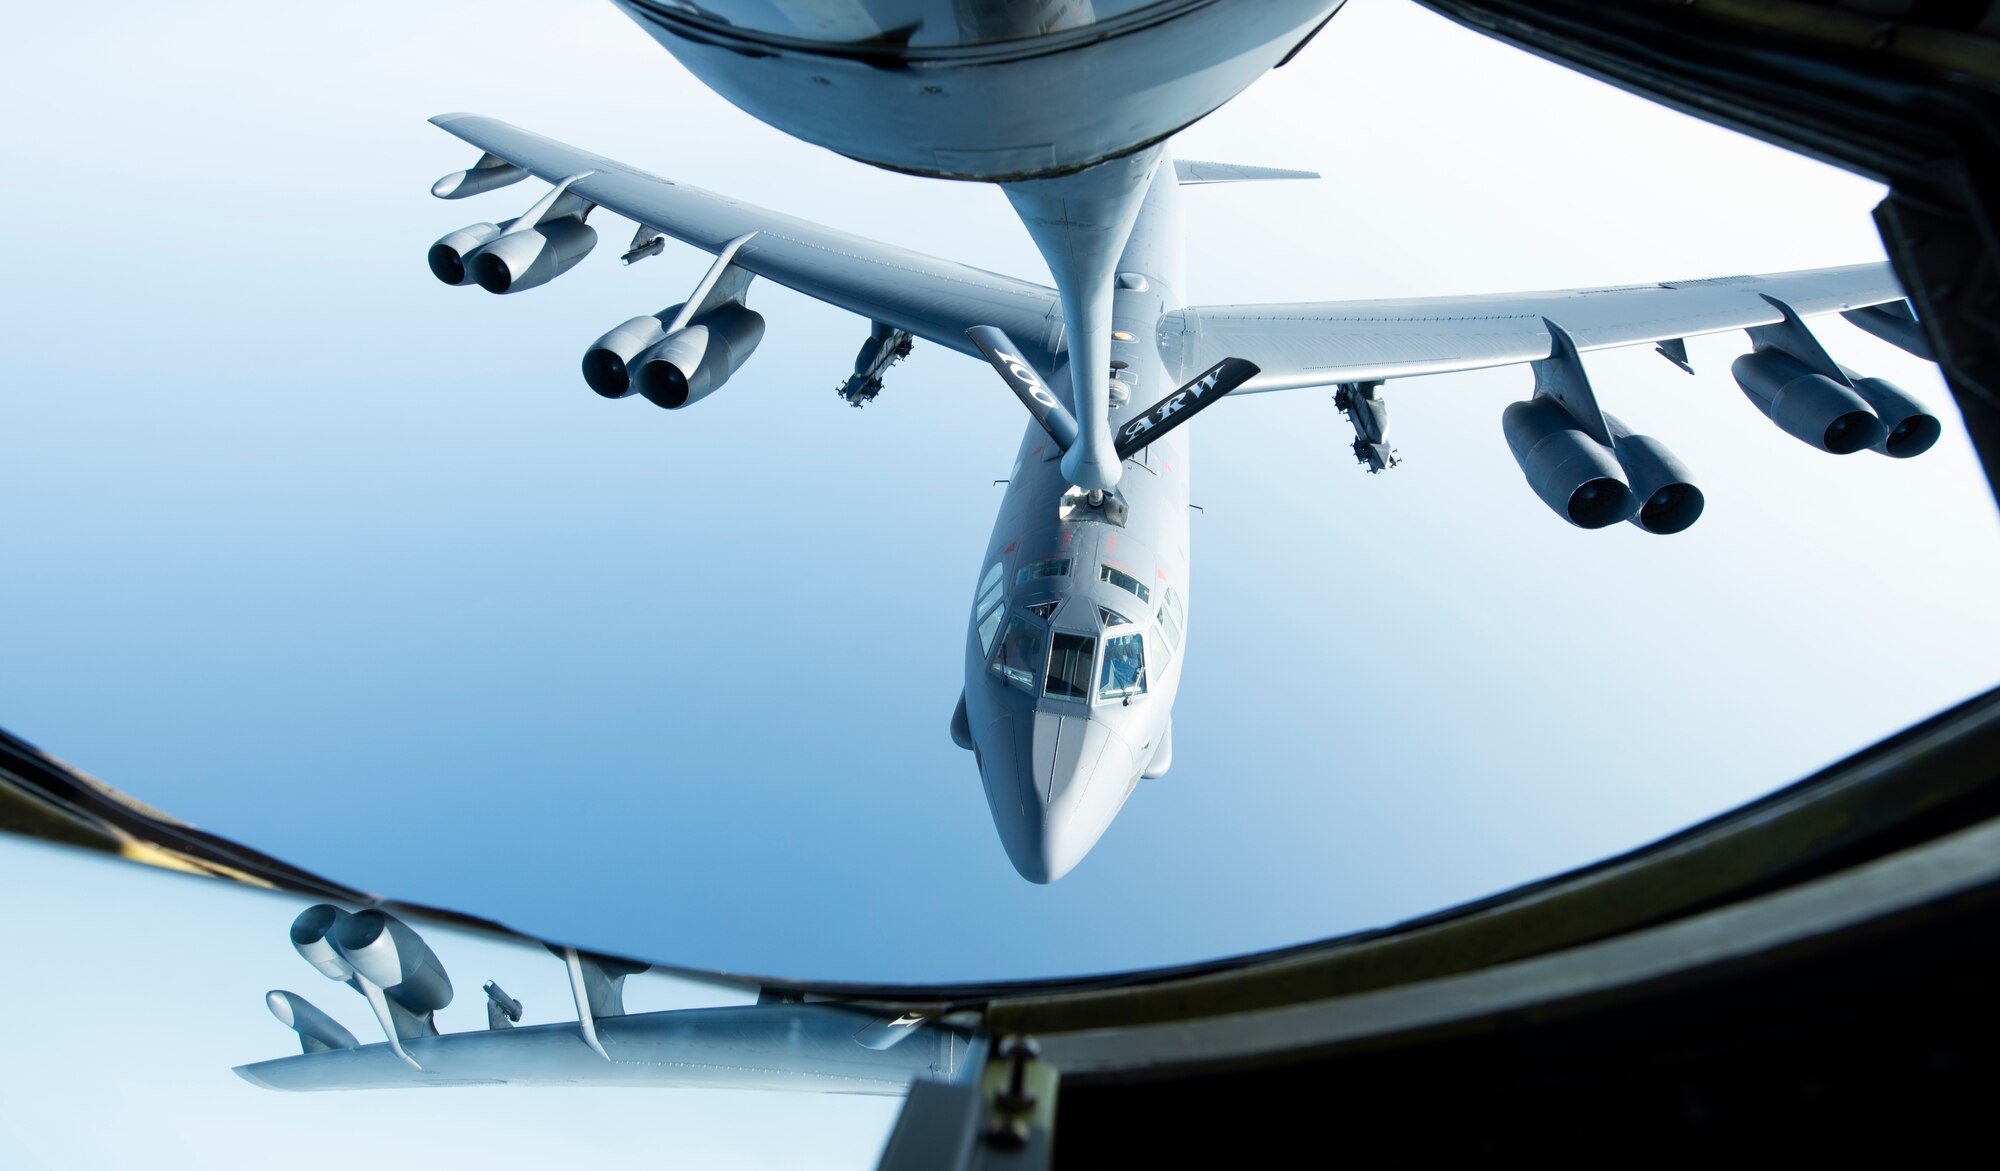 A U.S. Air Force B-52H Stratofortress, assigned to the 5th Bomb Wing at Minot Air Force Base, North Dakota, flies below a KC-135 Stratotanker from the 100th Air Refueling Wing, RAF Mildenhall, England, after receiving fuel above the Mediterranean Sea in support of a Bomber Task Force Europe mission, Sept. 16, 2020. The B-52s are deployed to RAF Fairford, England, in support of joint and combined training with U.S allies and partners. (U.S. Air Force photo by Senior Airman Jennifer Zima)